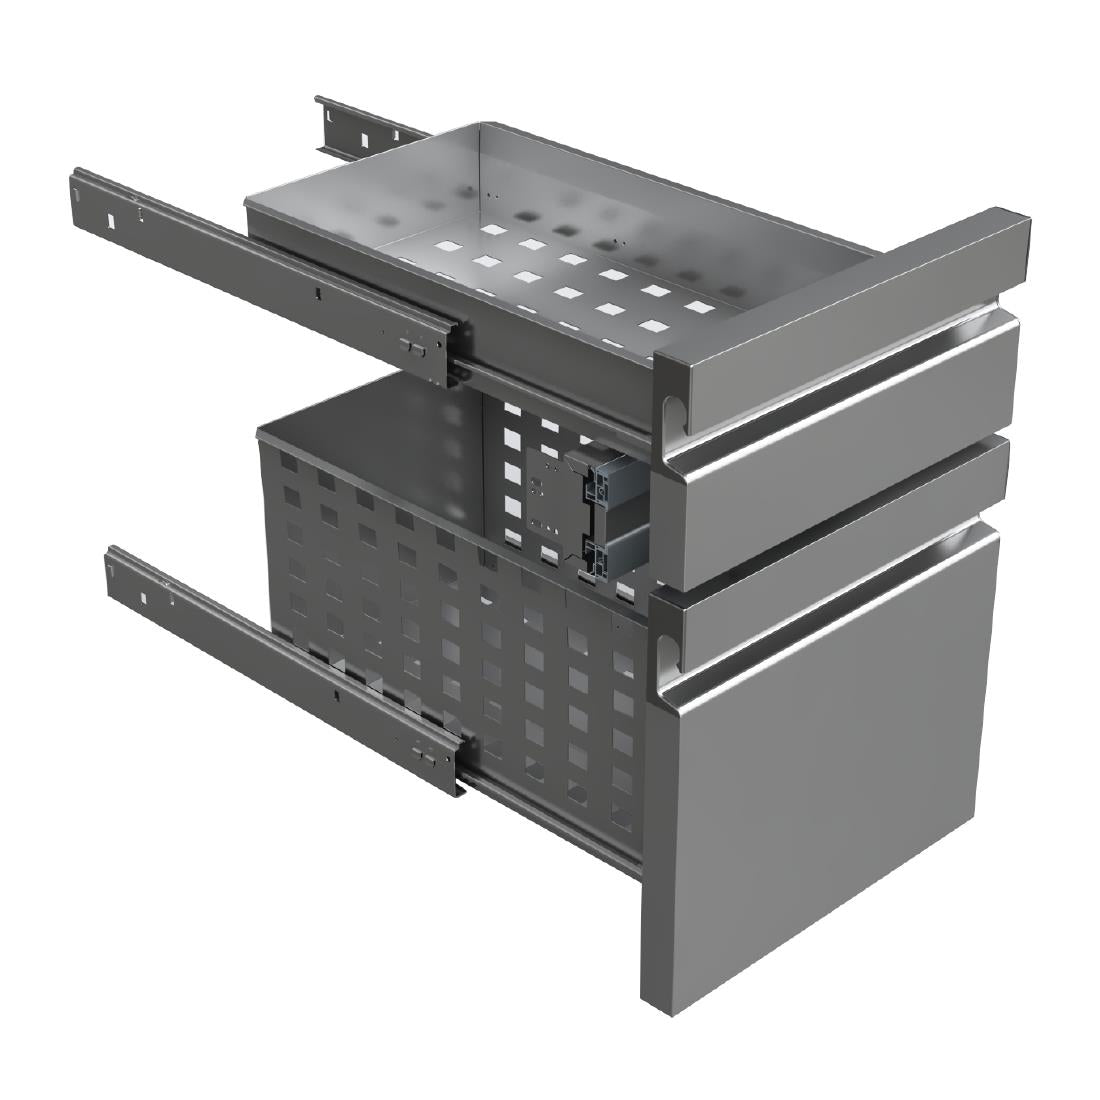 FU028 Fagor Concept Kit Drawers for Counter Units 1/3 & 2/3 JD Catering Equipment Solutions Ltd